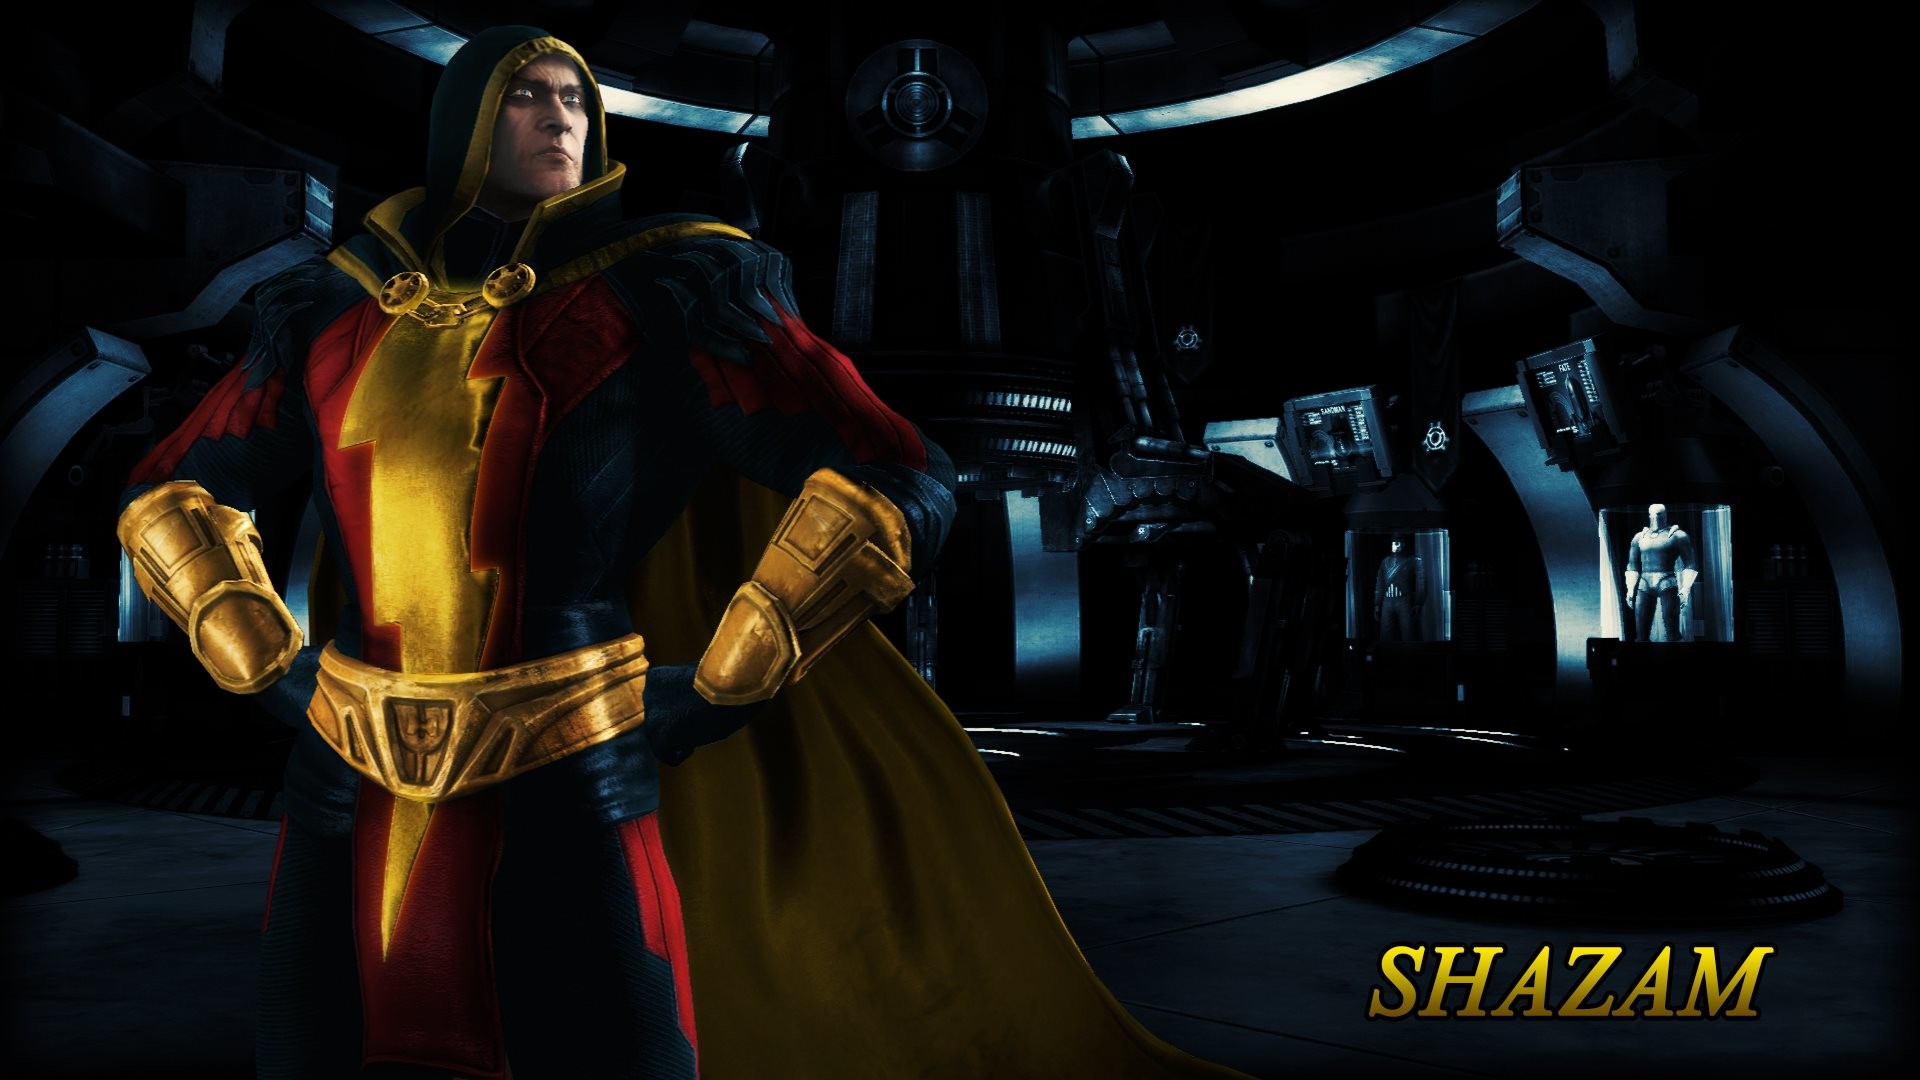 1920x1080 In the 7th wallpaper is Shazam (Regime) from Injustice - Gods Among Us